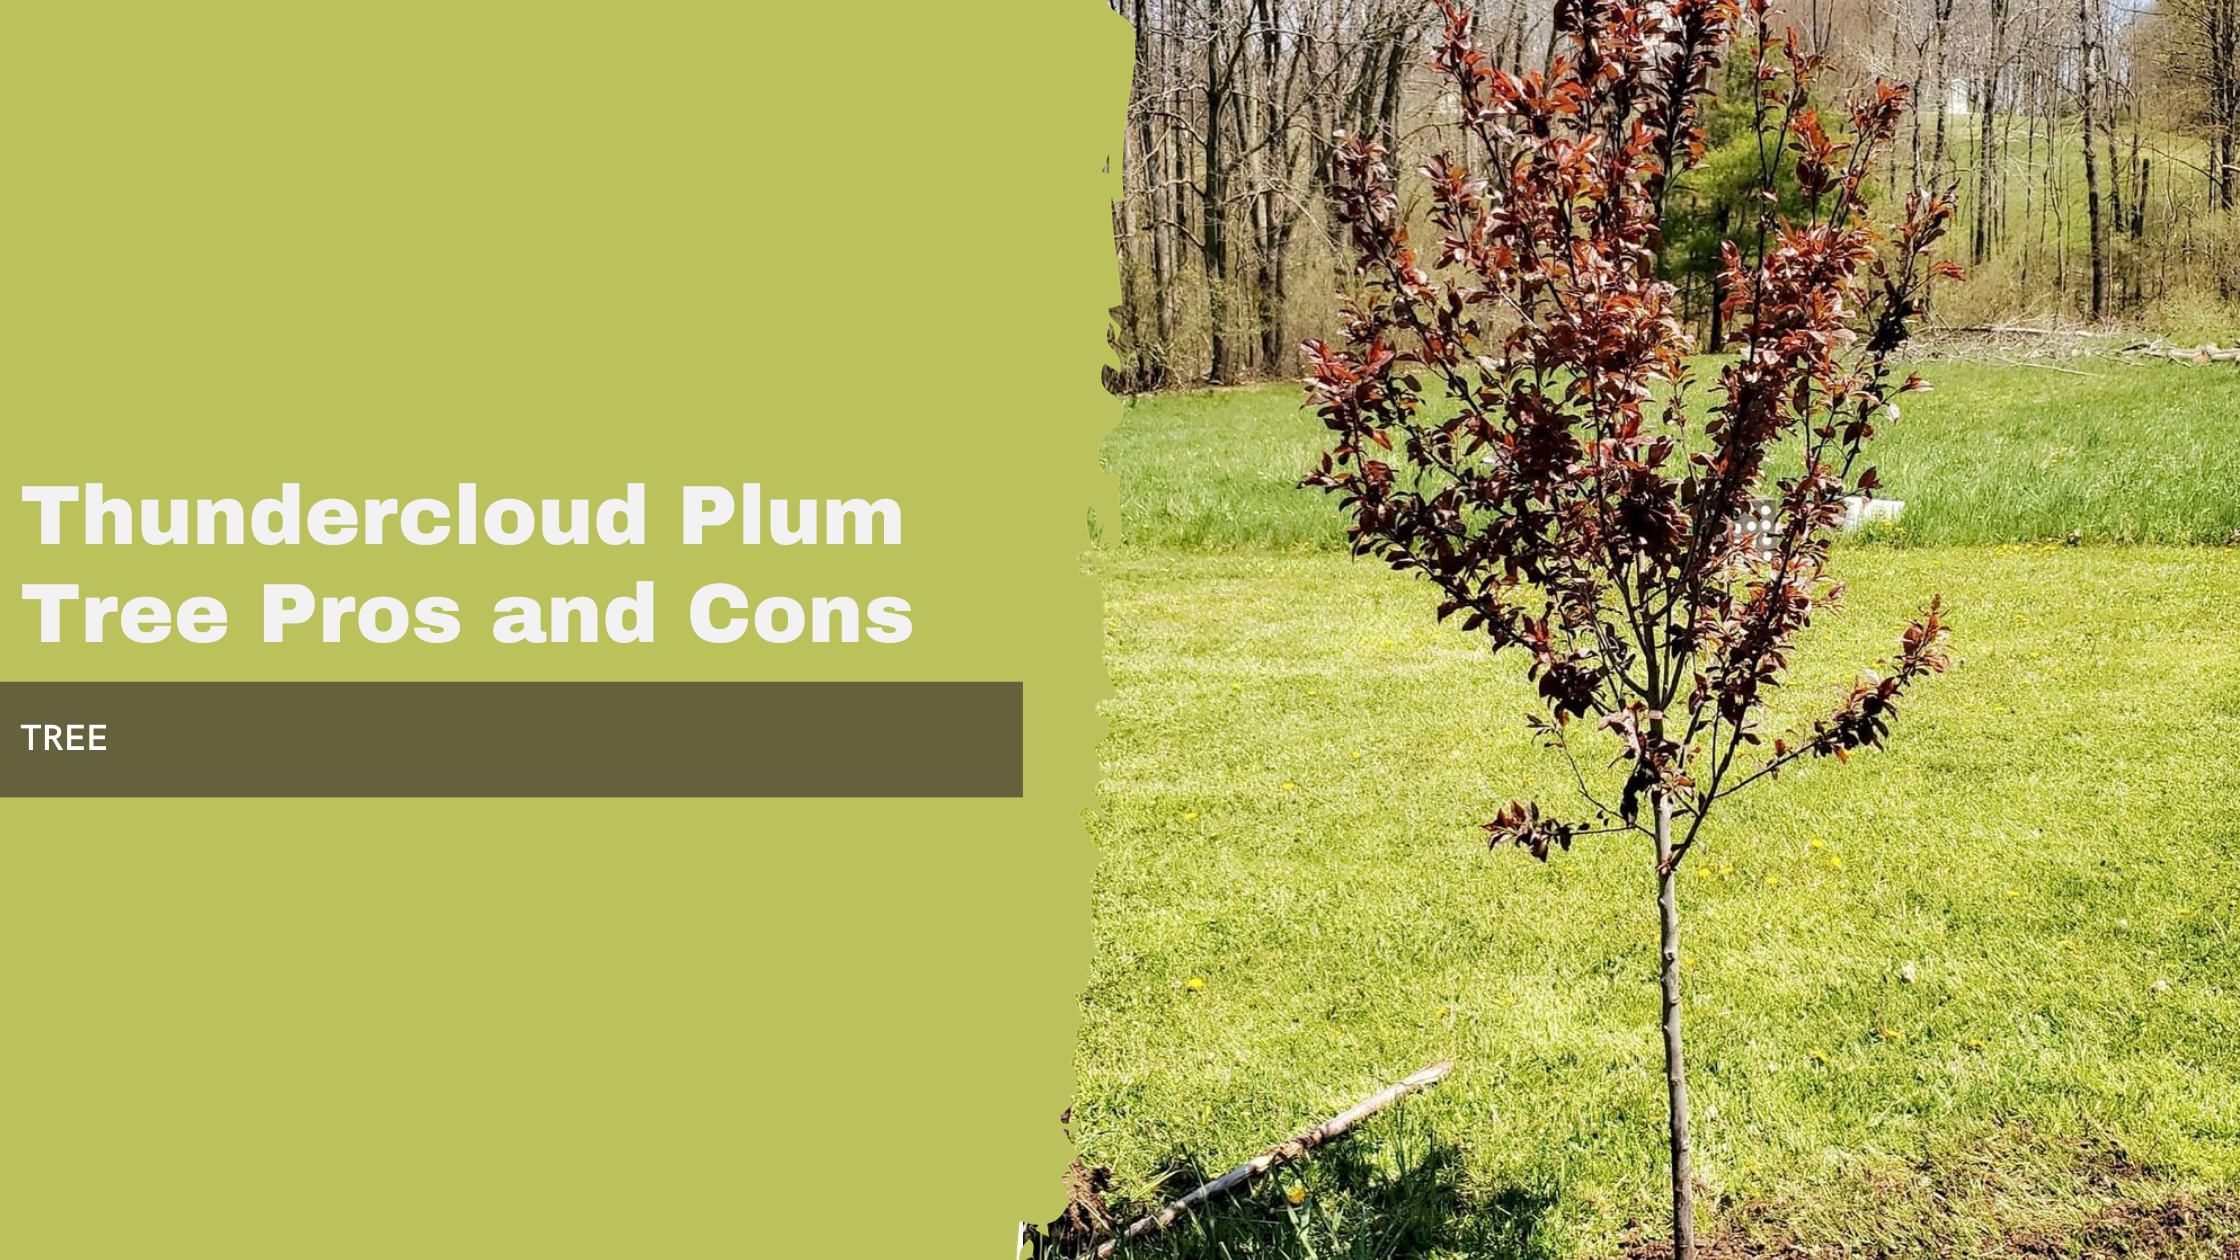 Thundercloud Plum Tree Pros and Cons